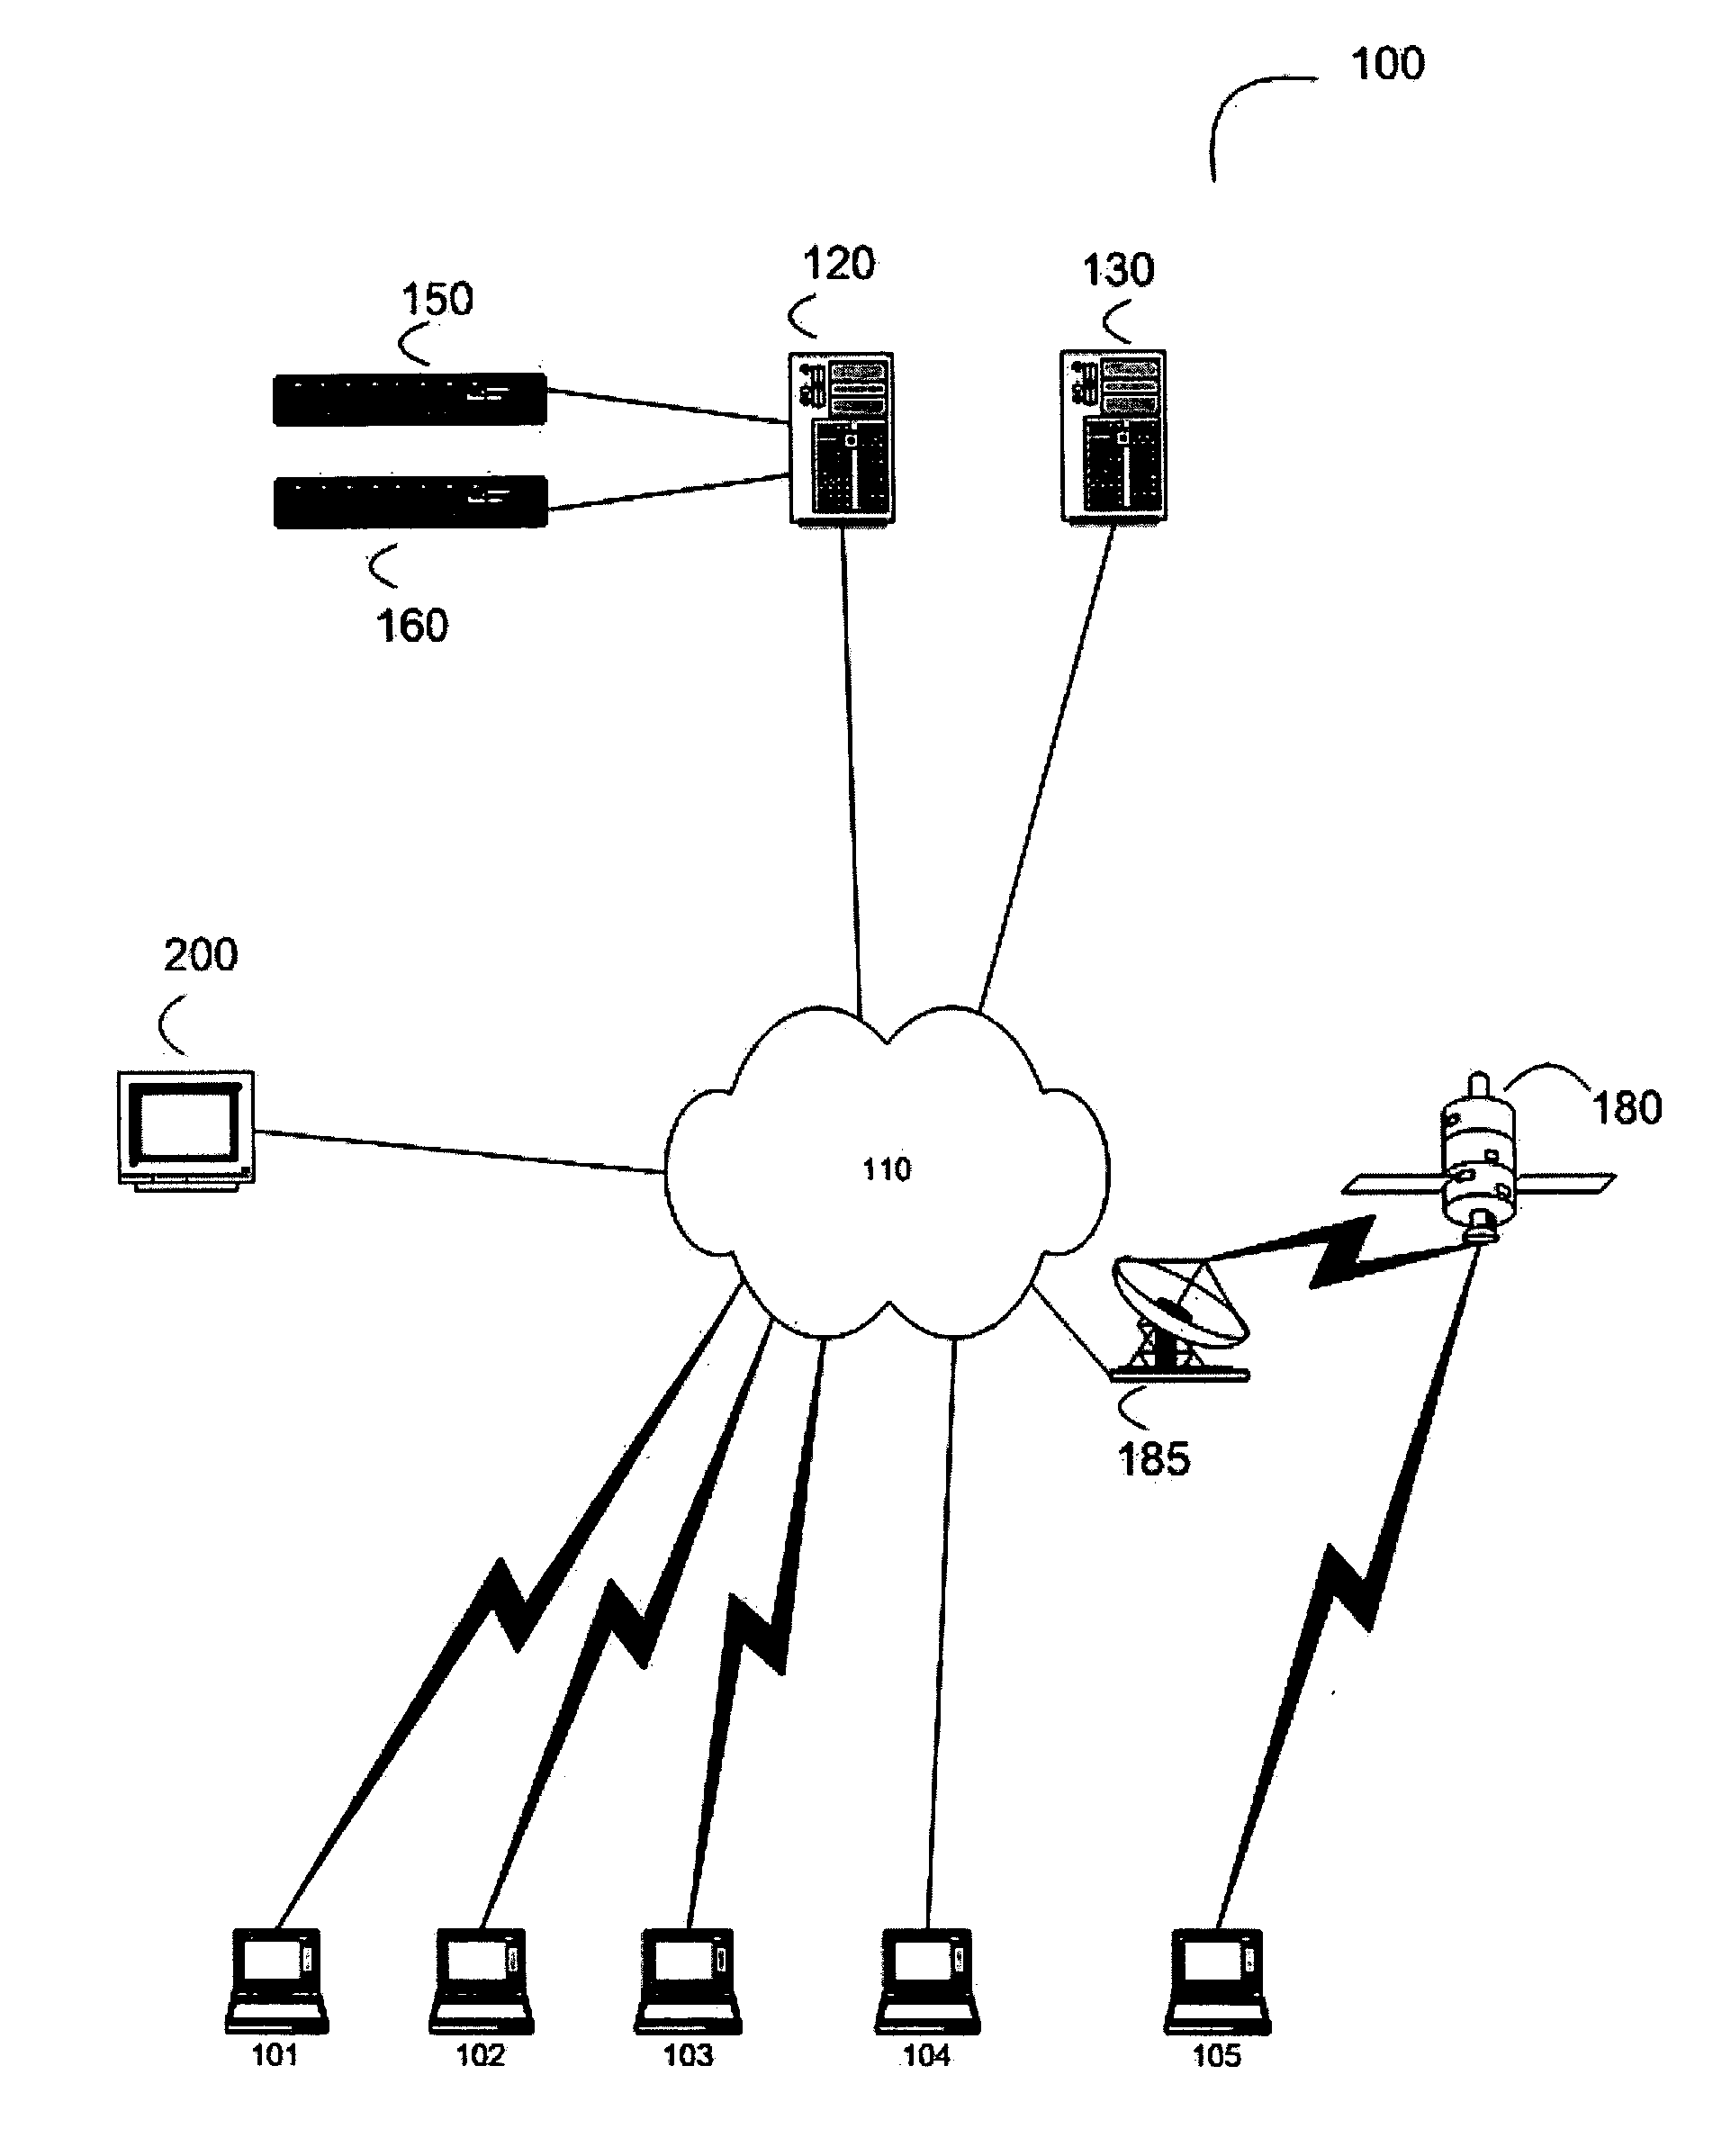 Interactive news gathering and media production control system